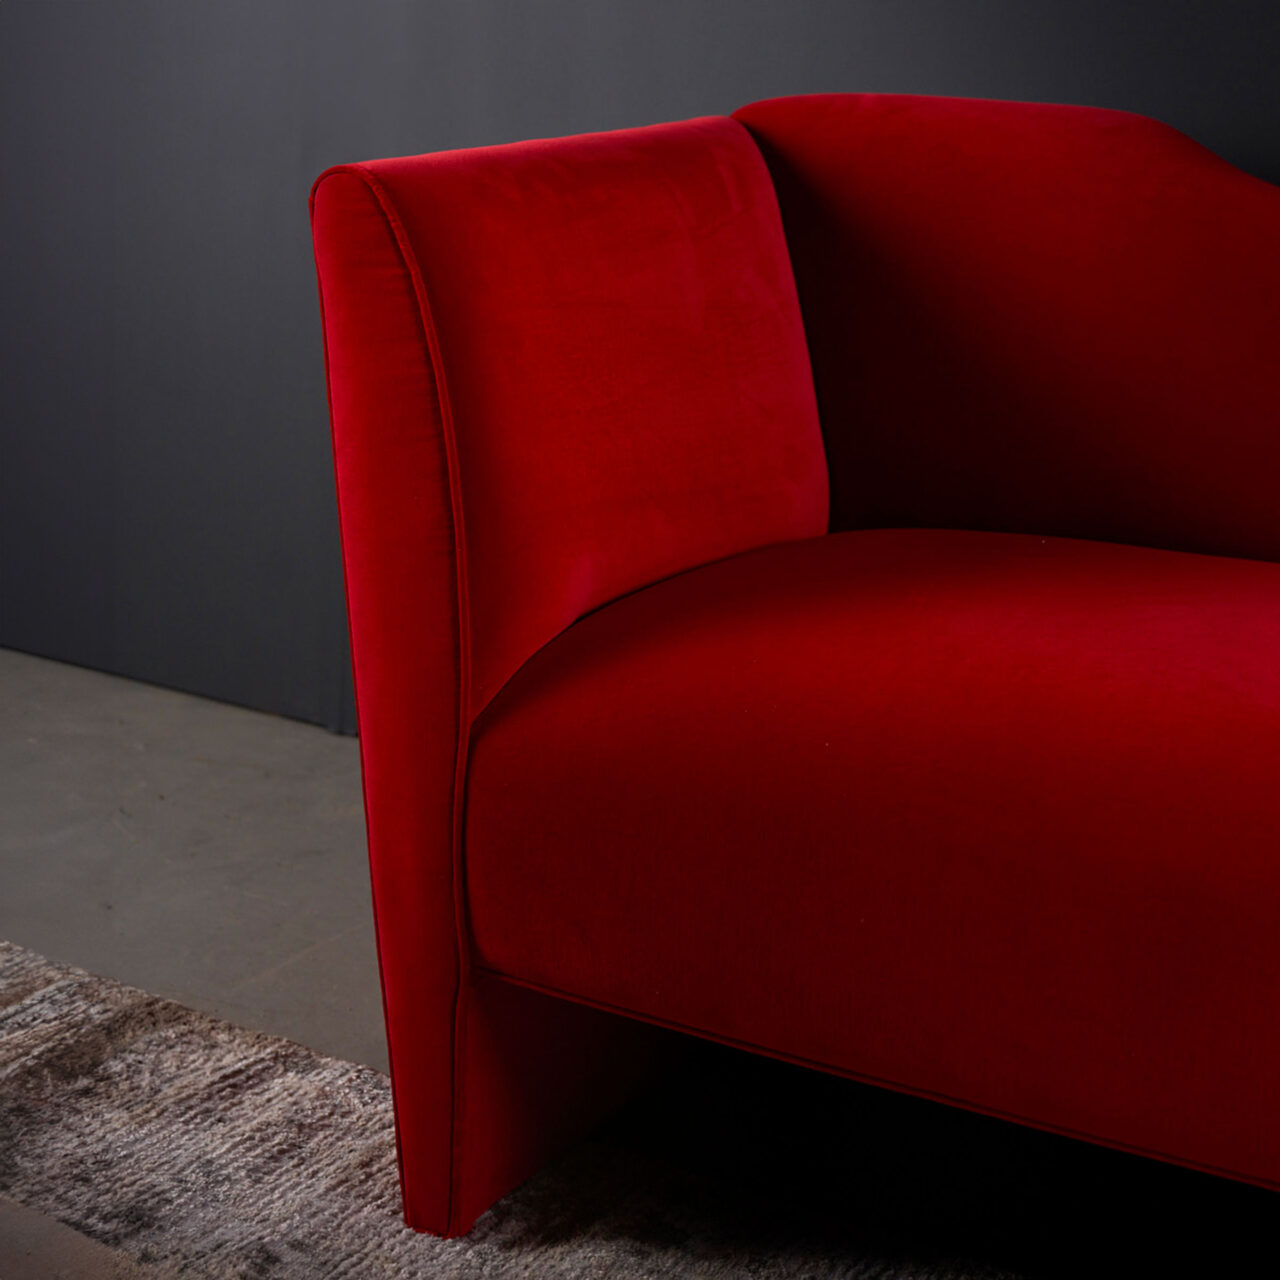 A bold and luxury SENTIENT Nersi sofa in vibrant red upholstery, with a curved backrest and a plush, inviting seat, in a room with a dark gray wall.